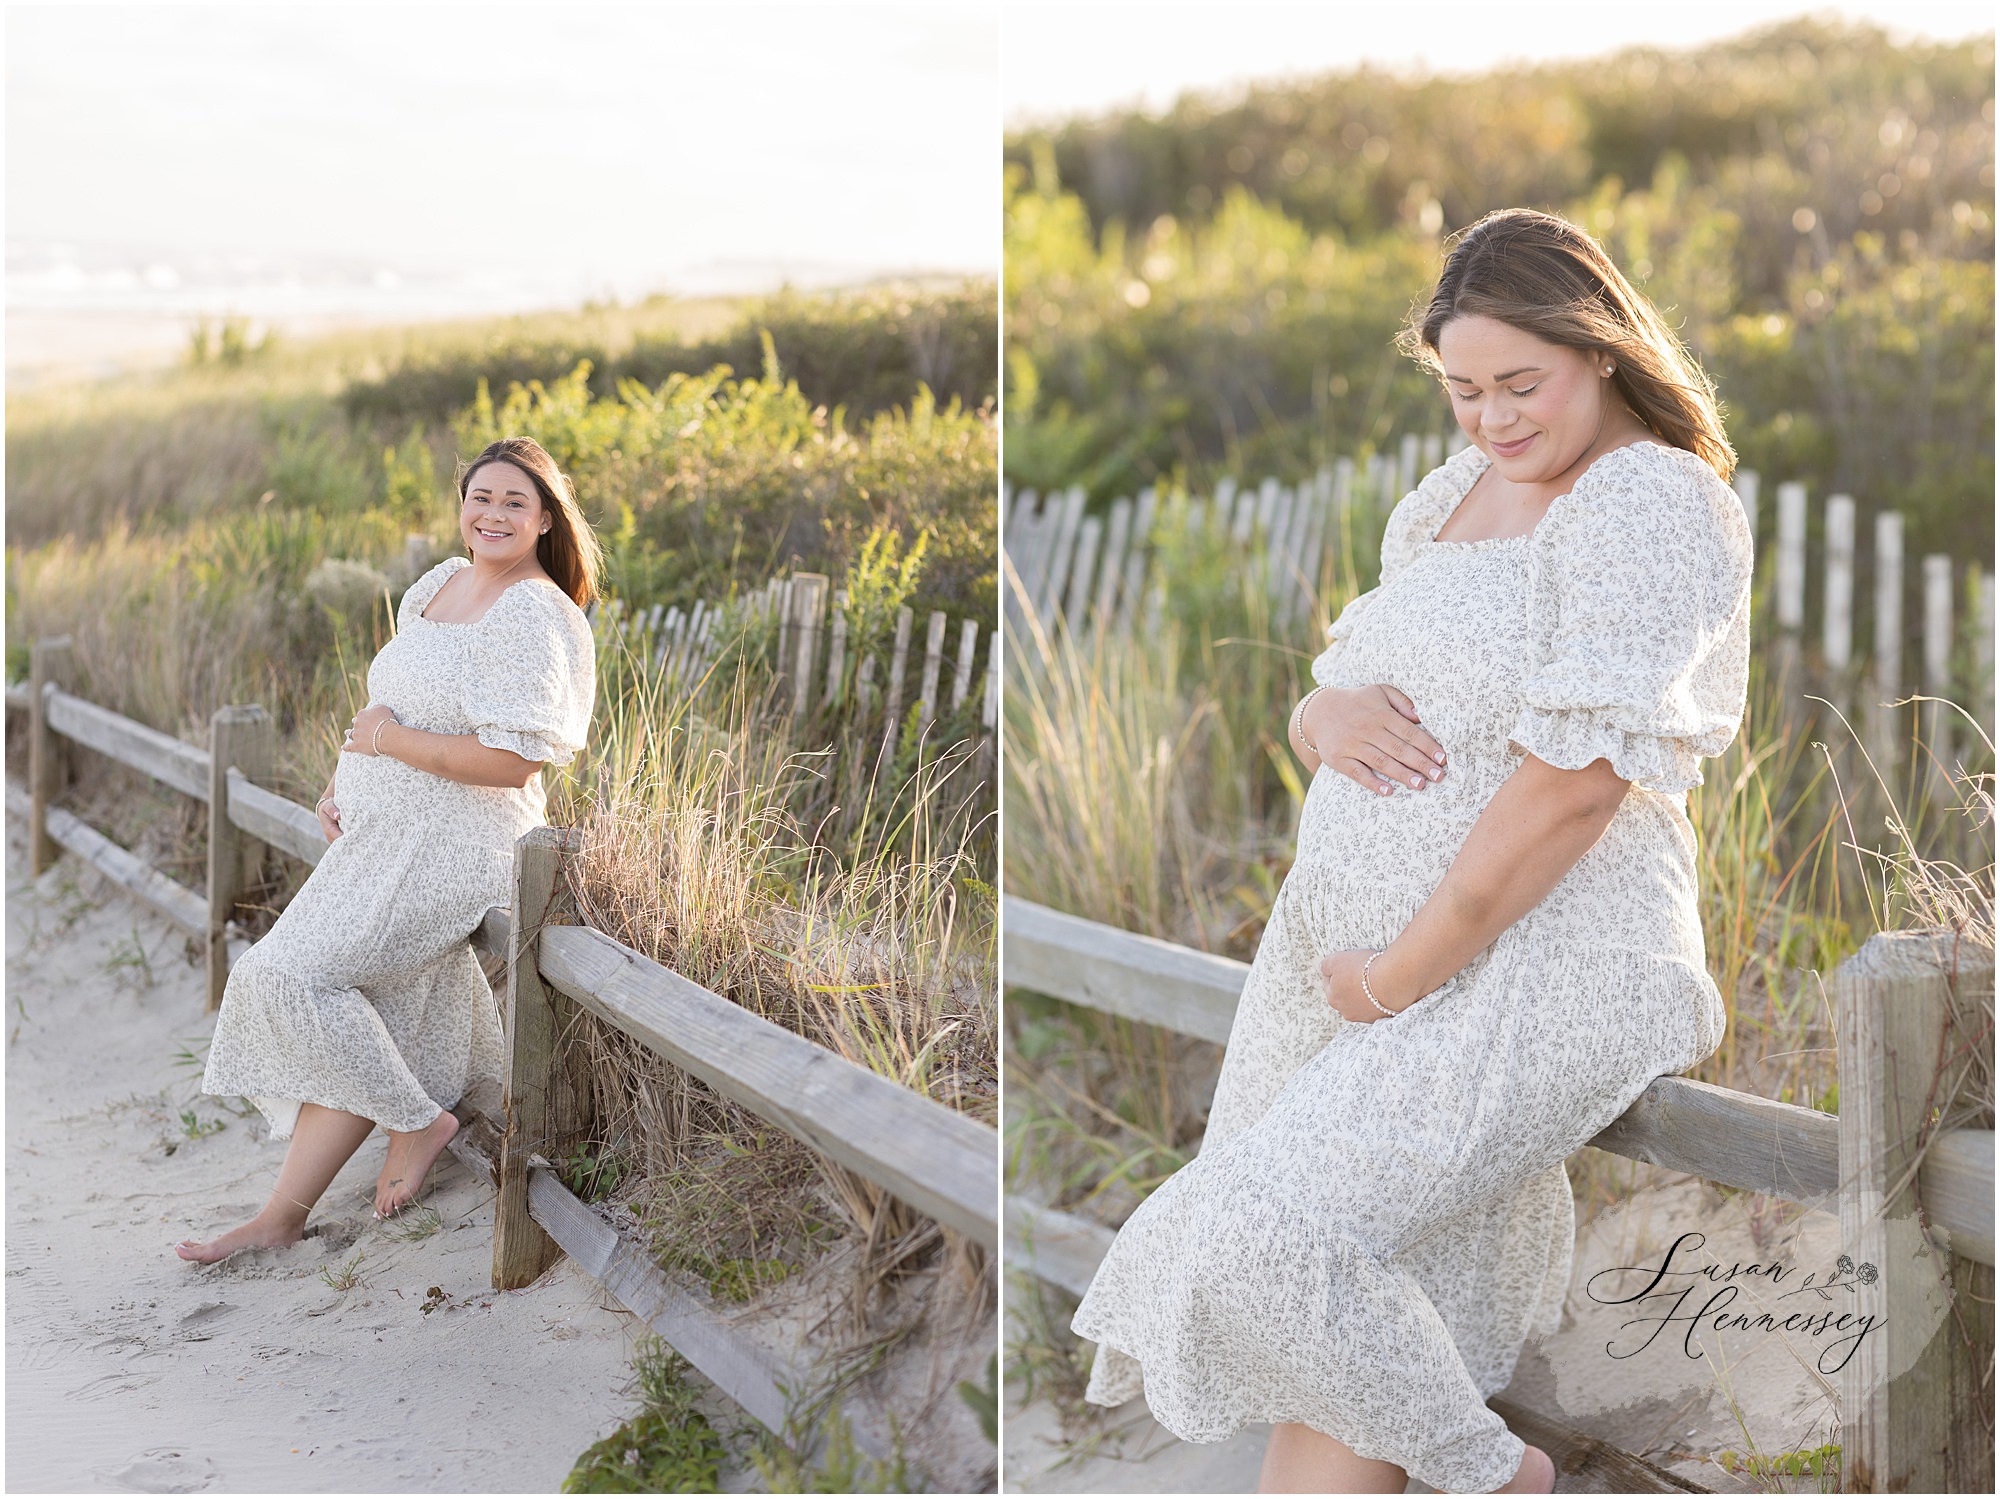 Beach Maternity Session photographed by Susan Hennessey Photography, South Jersey newborn and maternity photographer